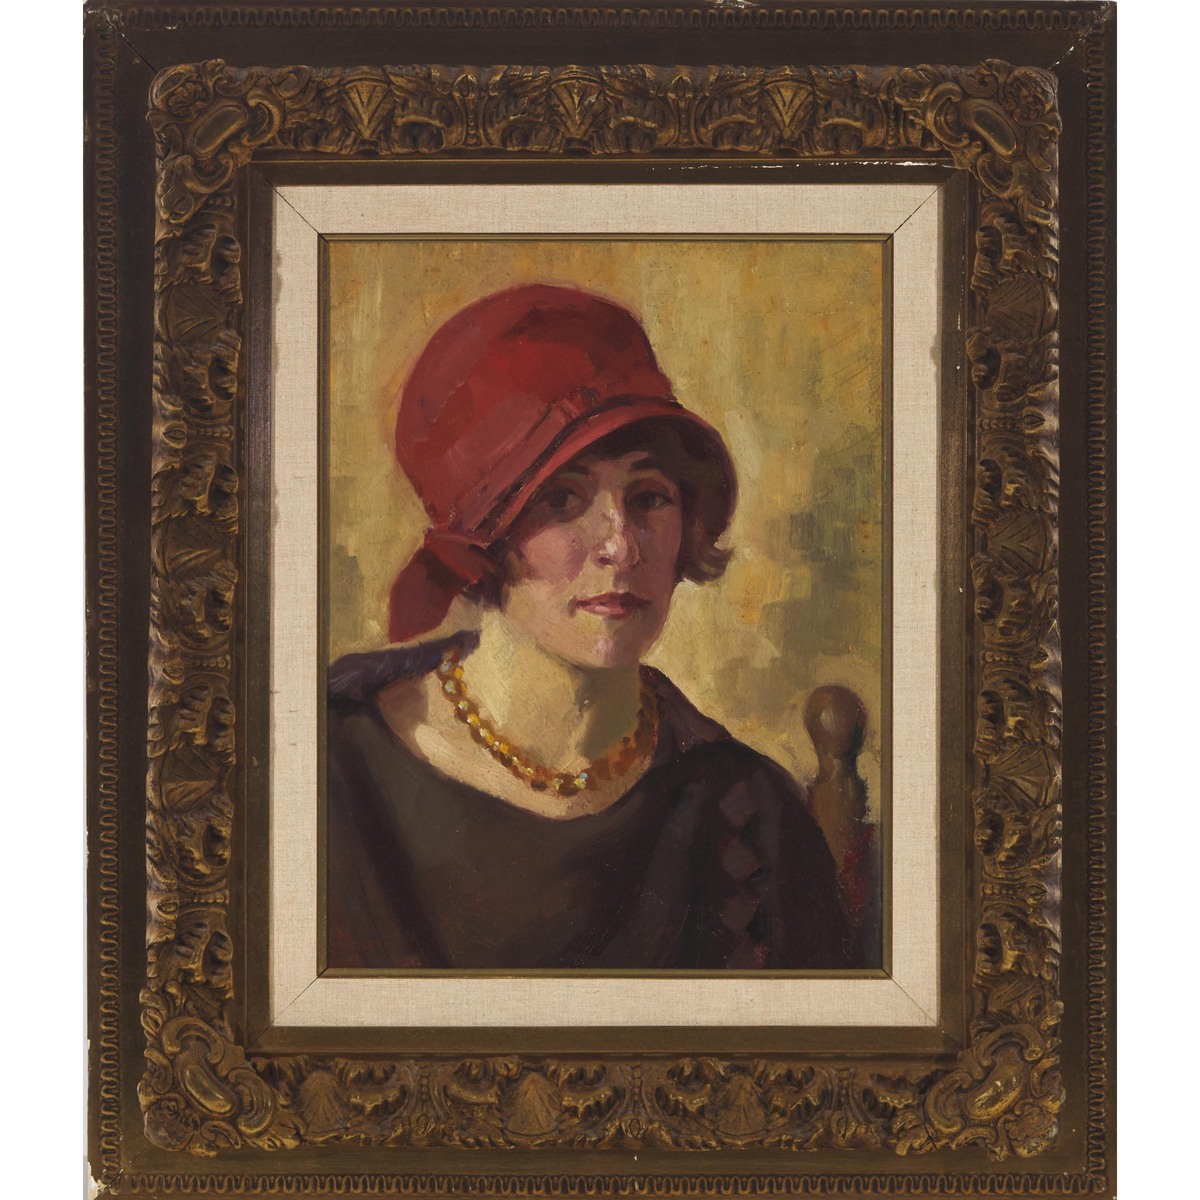 Richard E. Miller (1875-1943), UNTITLED (PORTRAIT OF A WOMAN IN A RED HAT) CA. 1920, signed lower le - Image 2 of 4